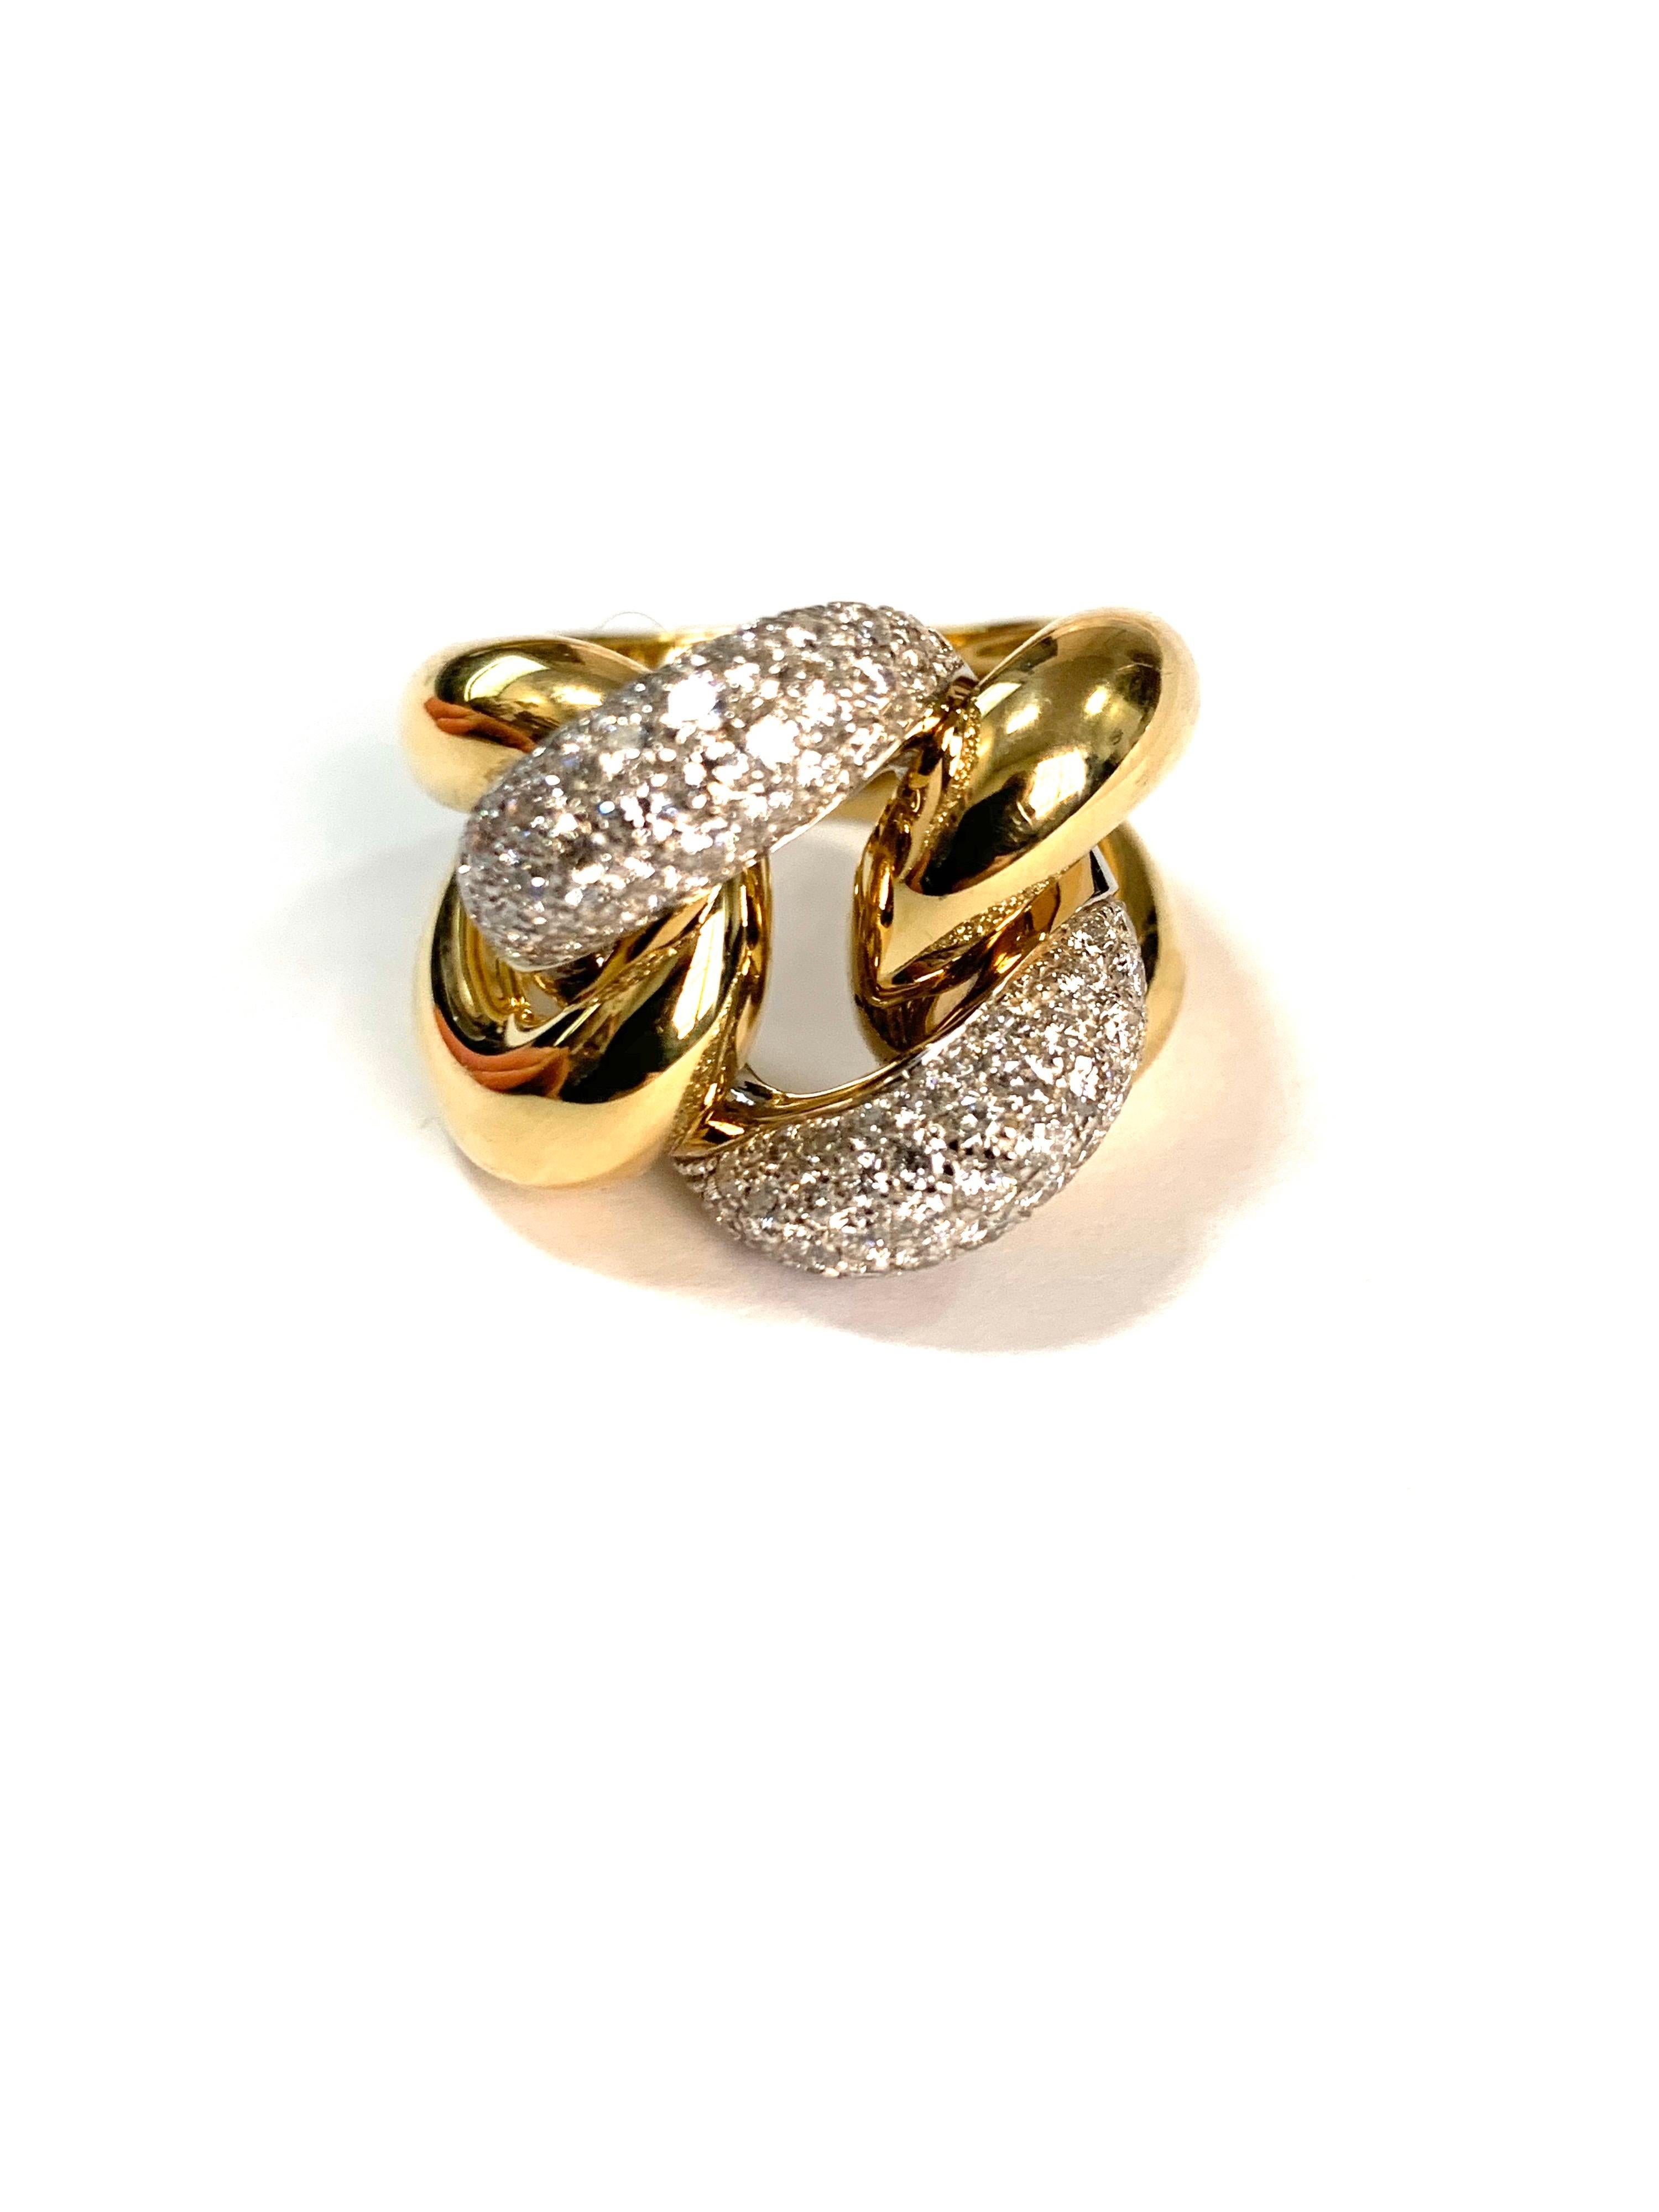 Classic groumette ring in 18 kt yellow gold and white diamonds

This is the iconic collection of Micheletto

the total weight of the gold is  gr 17.30
the total weight of the diamonds is ct 2.15 - color GH clarity VVS1
STAMP: 10 MI ITALY 750
US SIZE